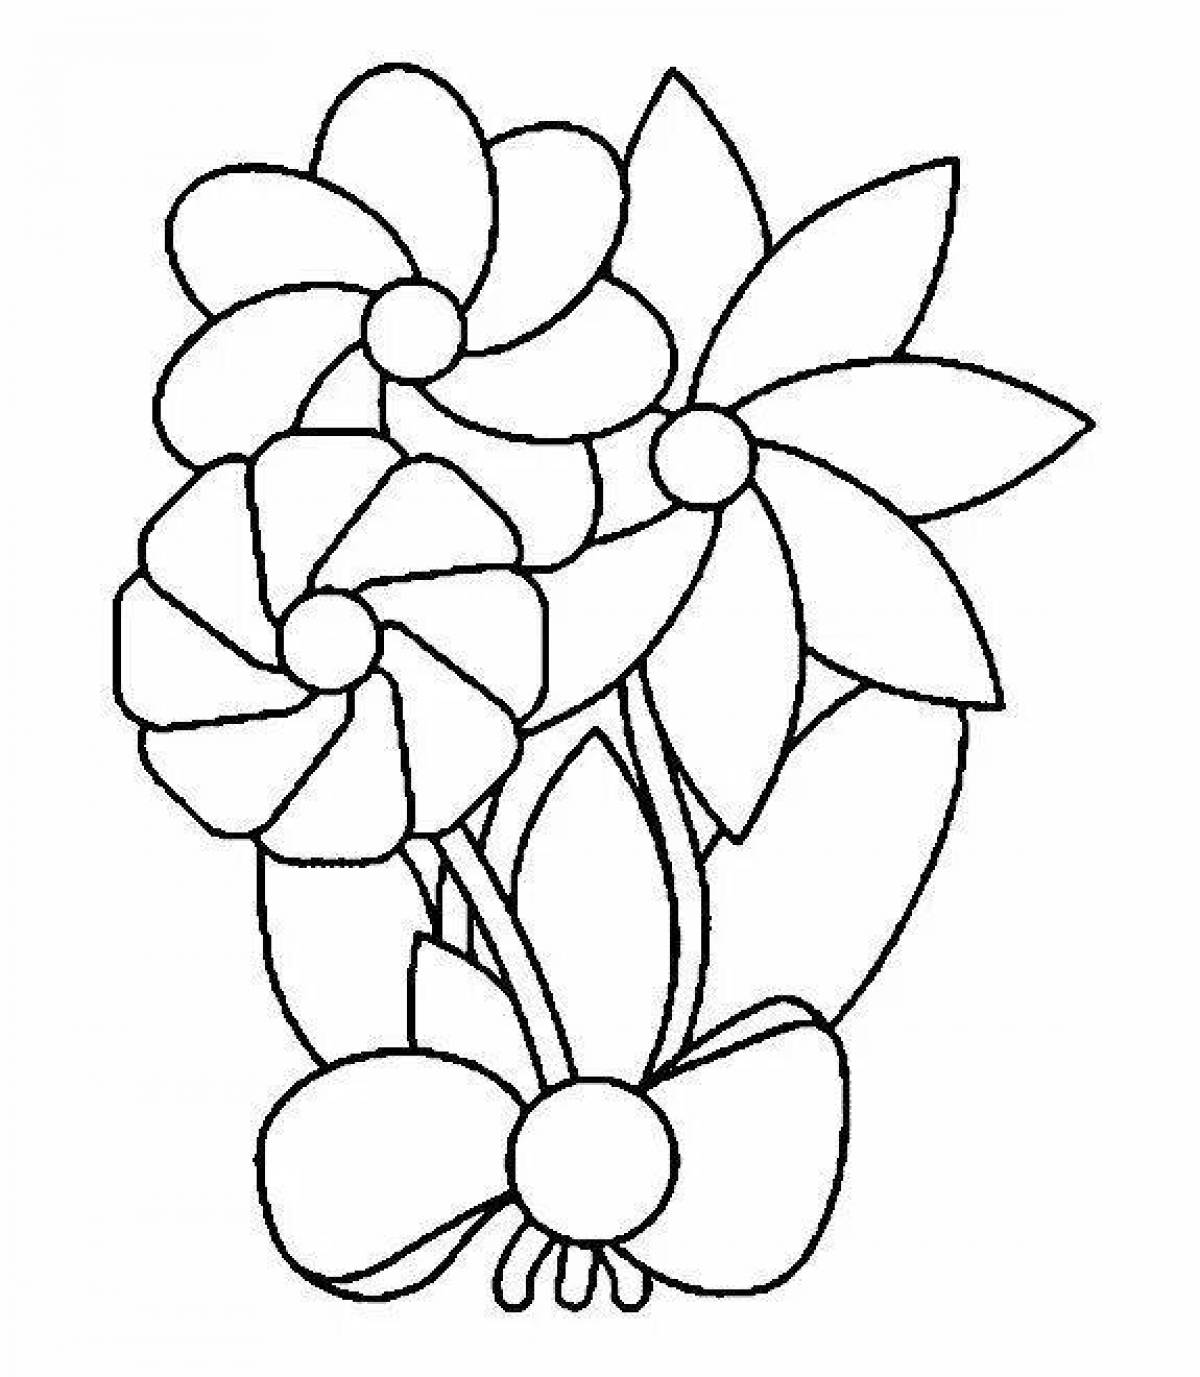 Glowing bouquet coloring book for kids